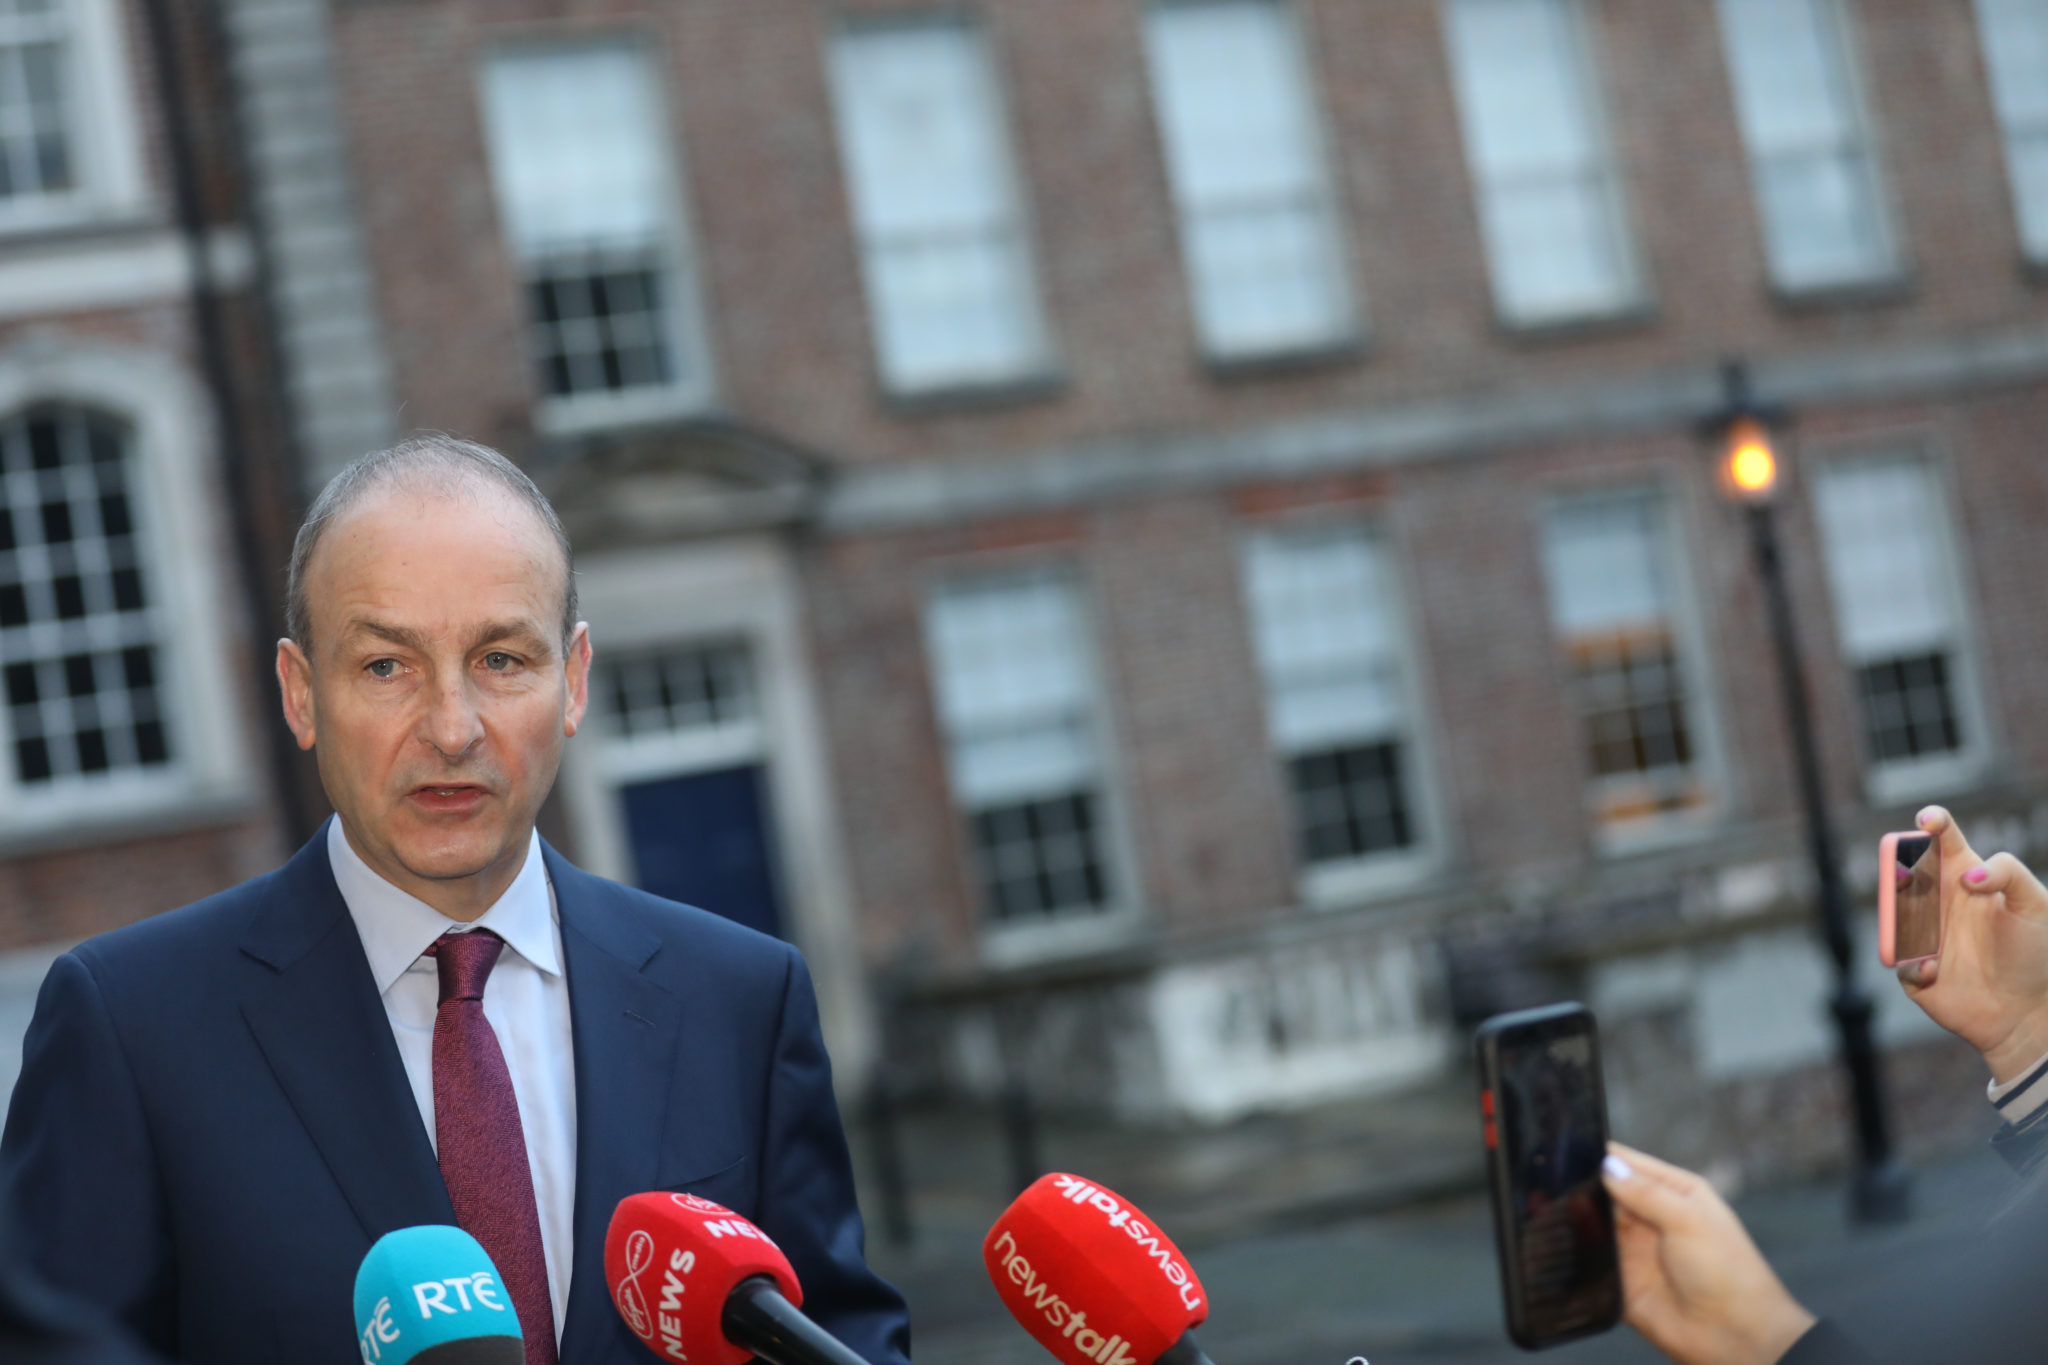 Taoiseach Micheál Martin outside Dublin Castle before this morning's meeting of the Cabinet, 19-10-2021. Image: Leah Farrell/RollingNews